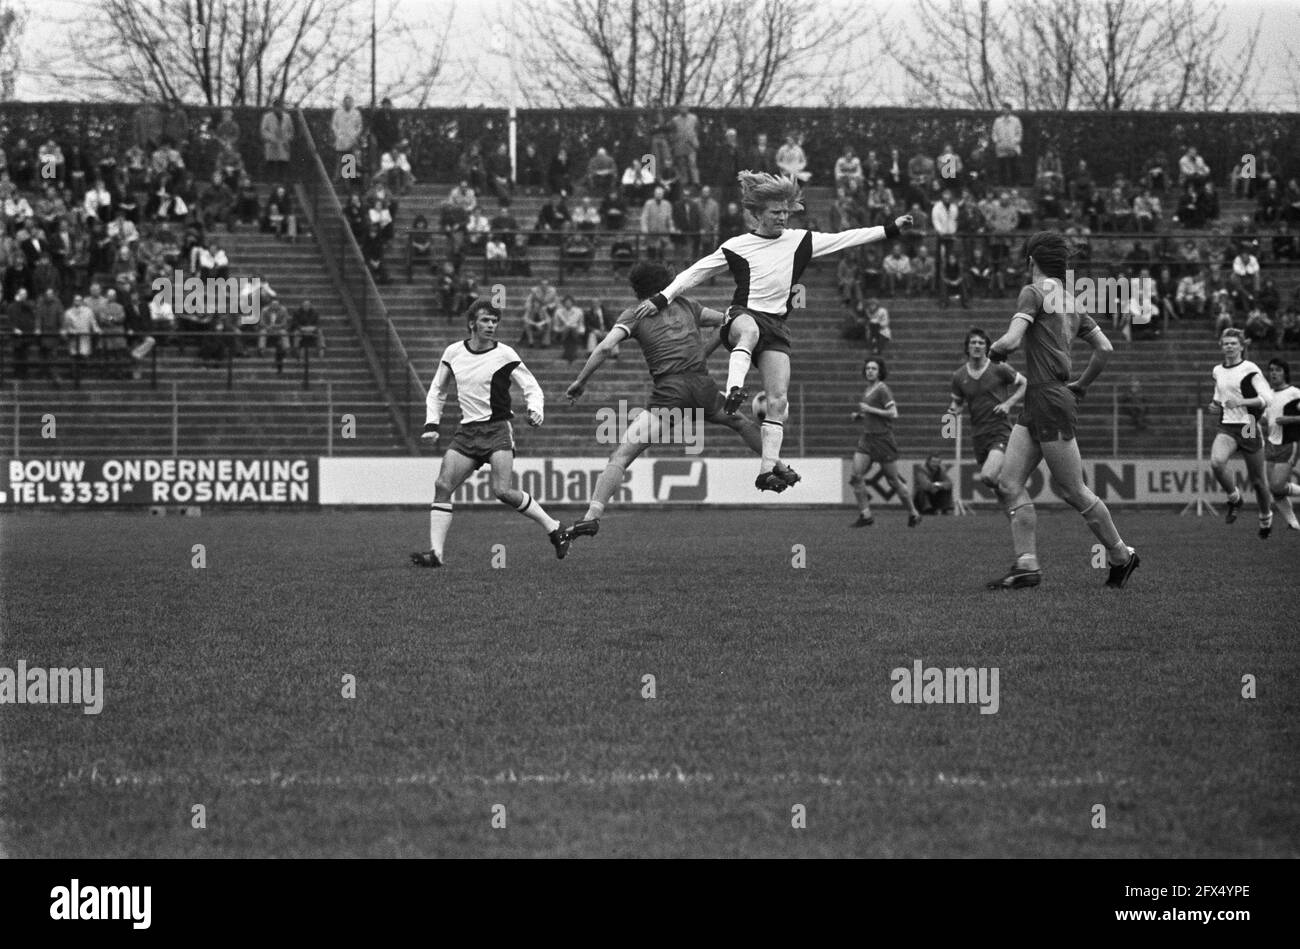 Elinkwijk against VVV 2-0, KNVB cup, Van der Bosch (left) is going to score  1-0, December 10, 1972, sports, soccer, The Netherlands, 20th century press  agency photo, news to remember, documentary, historic